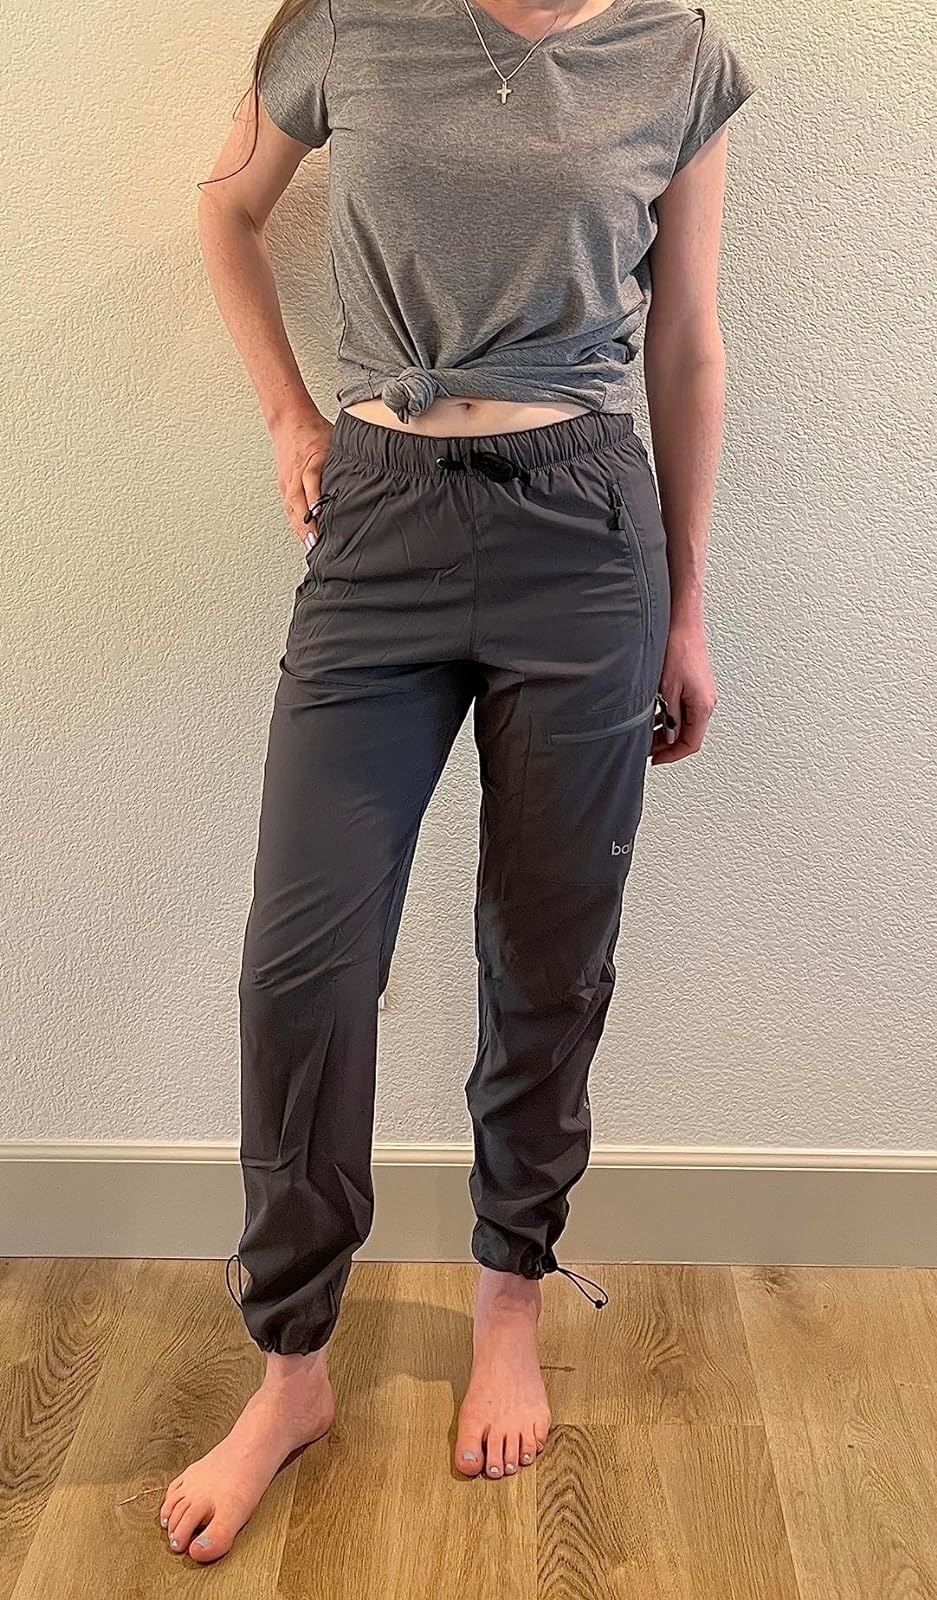 Best leggings for hiking? I have basically destroyed my Aligns by hiking in  them so I was wondering what your favorites are! (wearing the aligns in  black in the picture-- not the